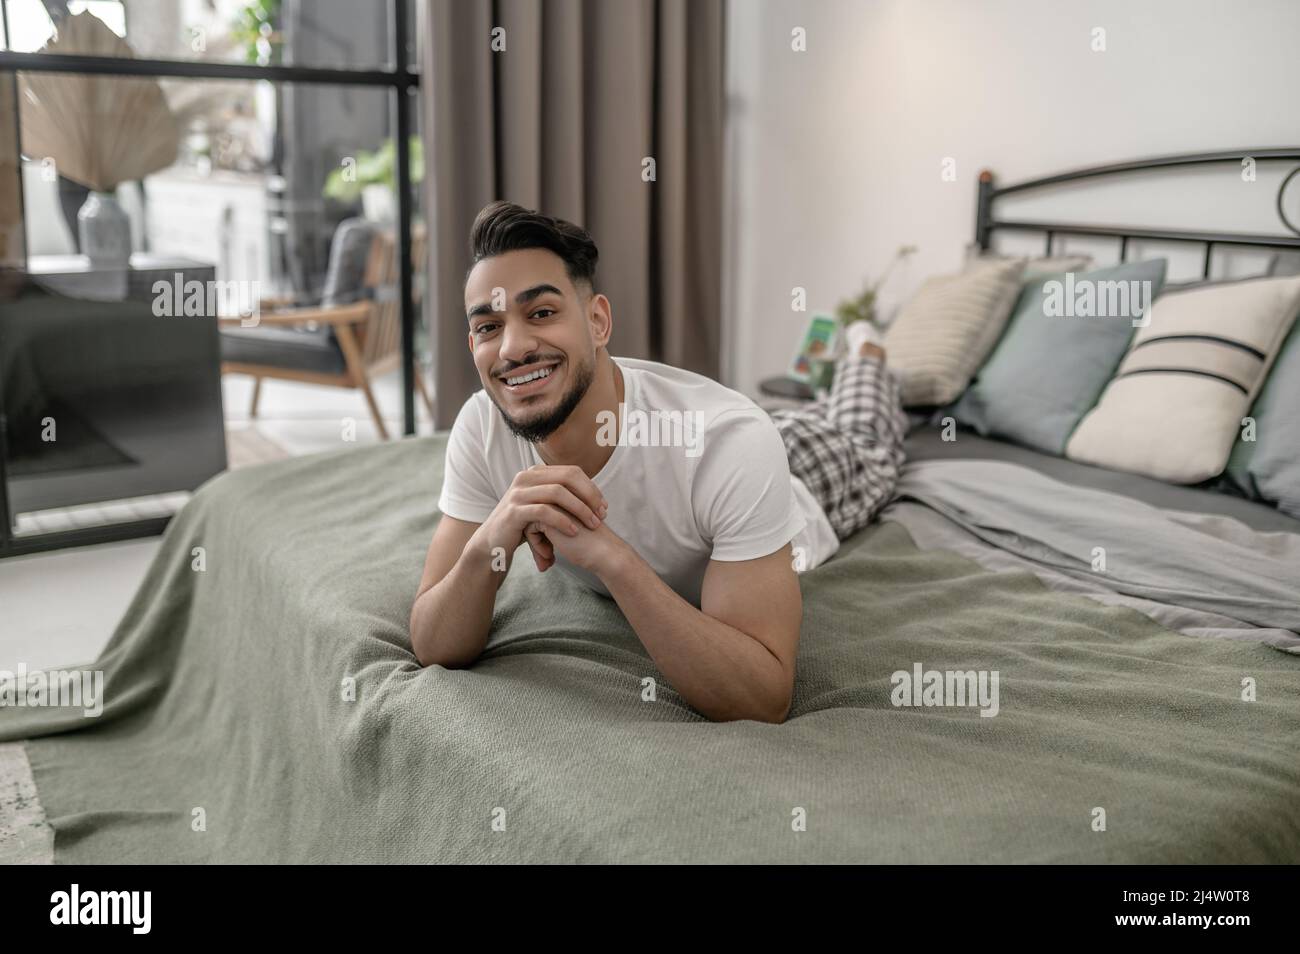 A young man spening day at home and feeling relaxed Stock Photo